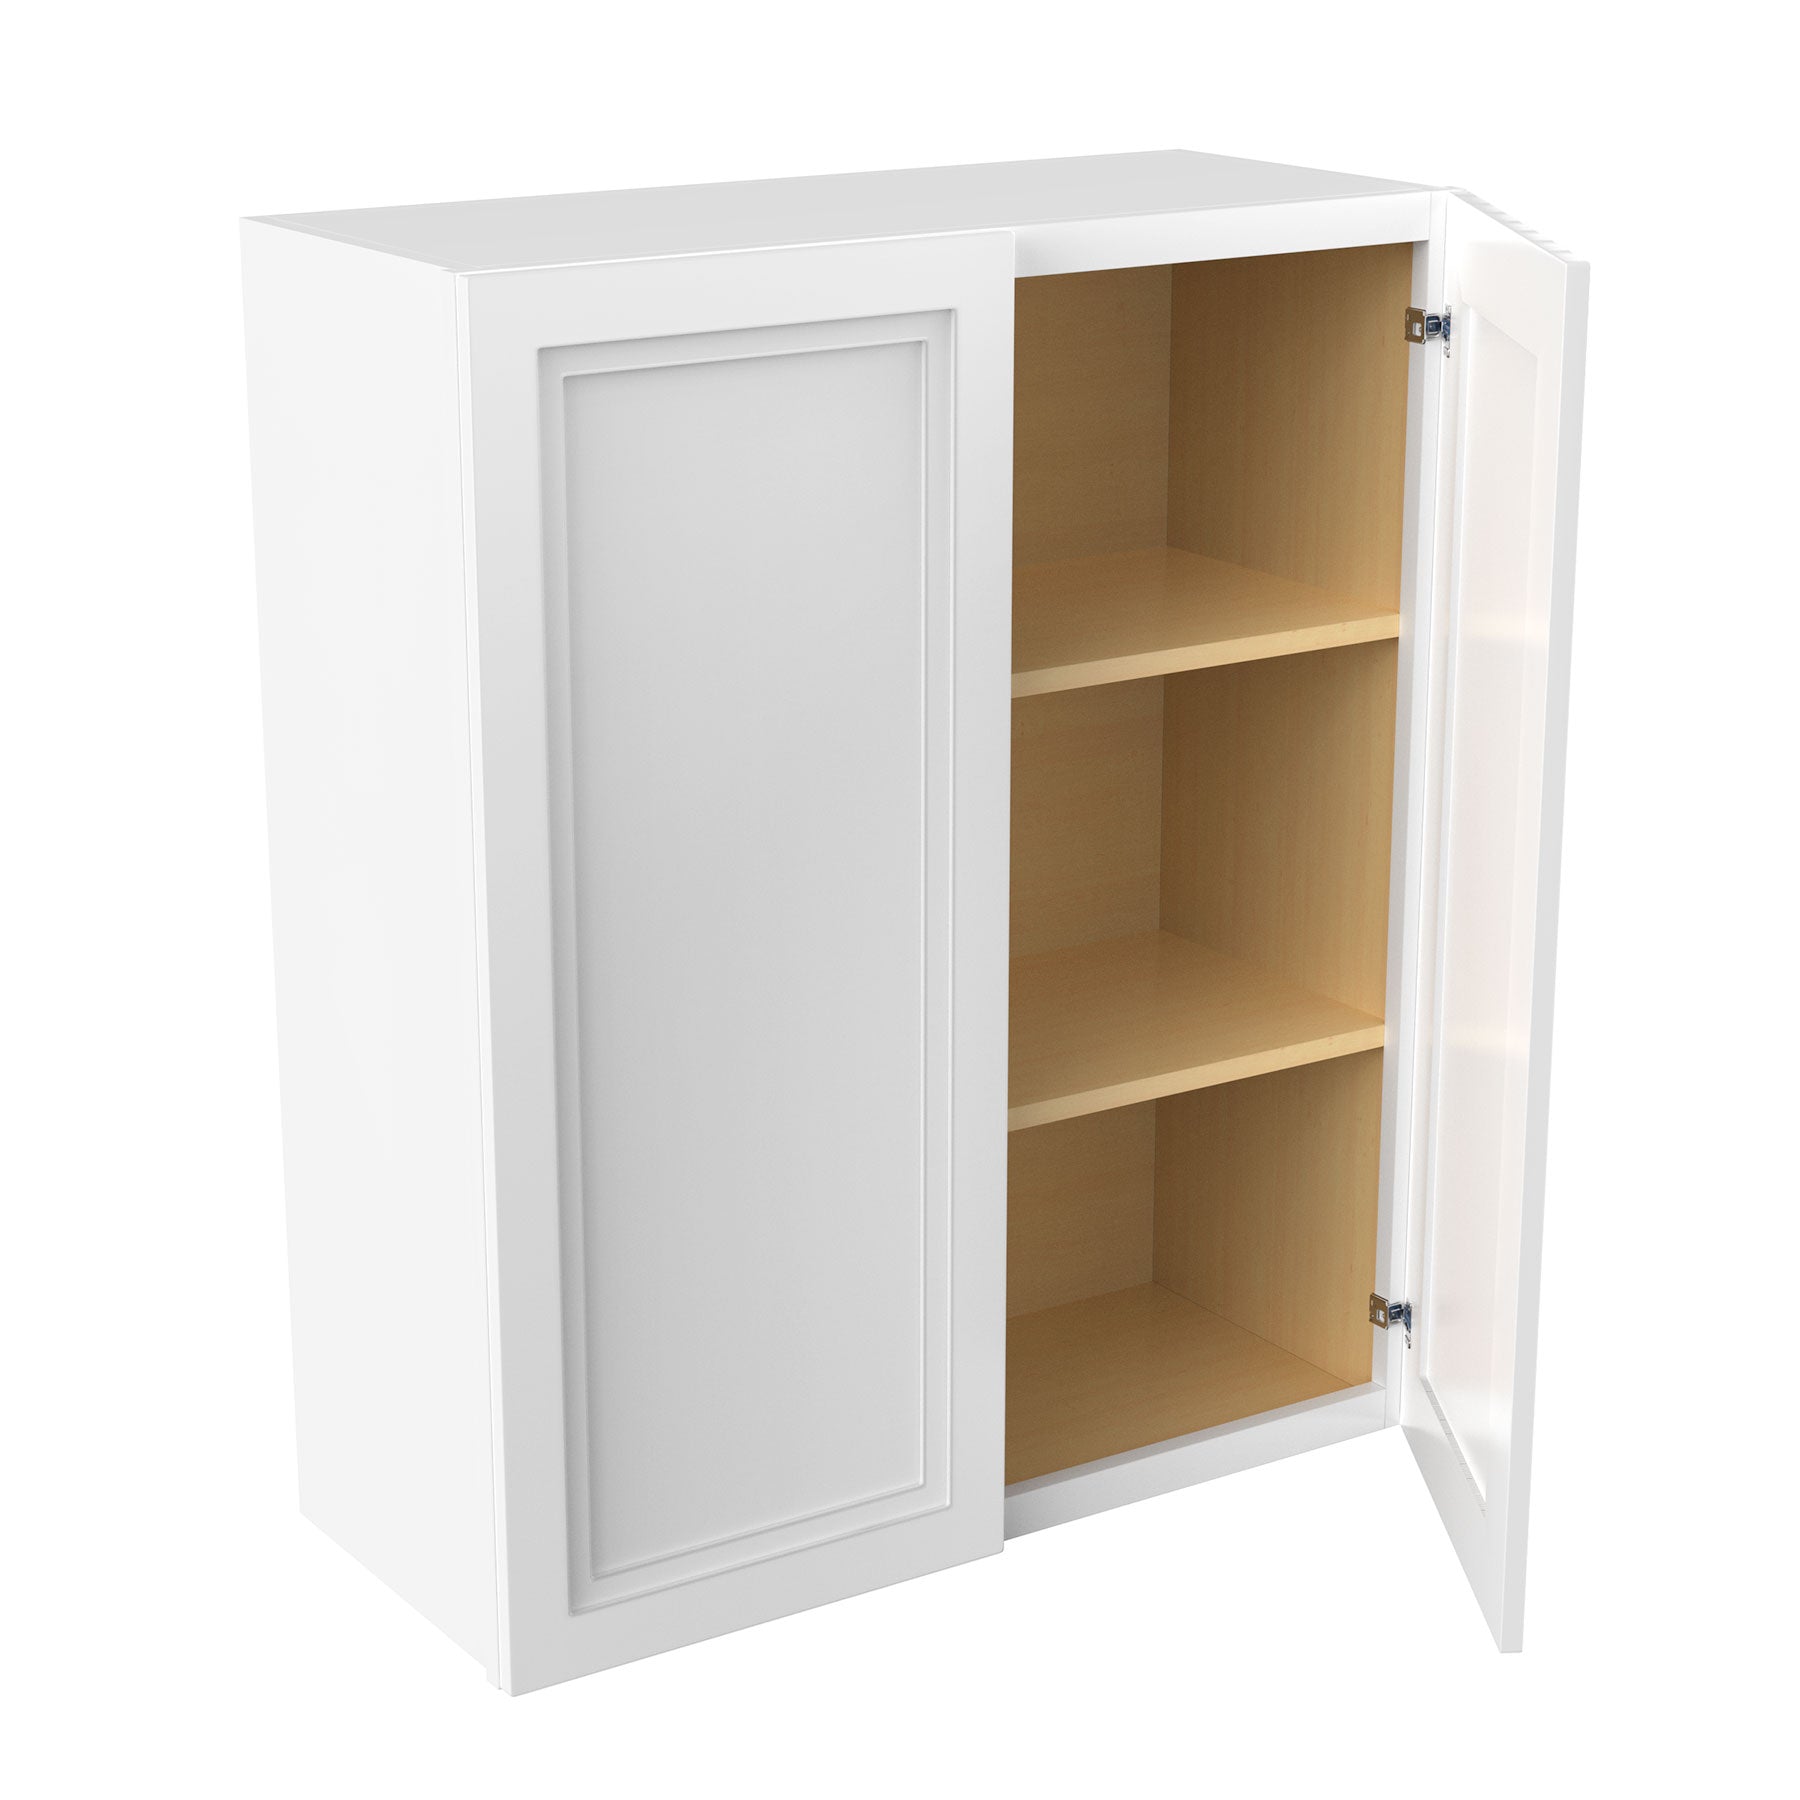 RTA - Fashion White - 36" High Double Door Wall Cabinet | 30"W x 36"H x 12"D